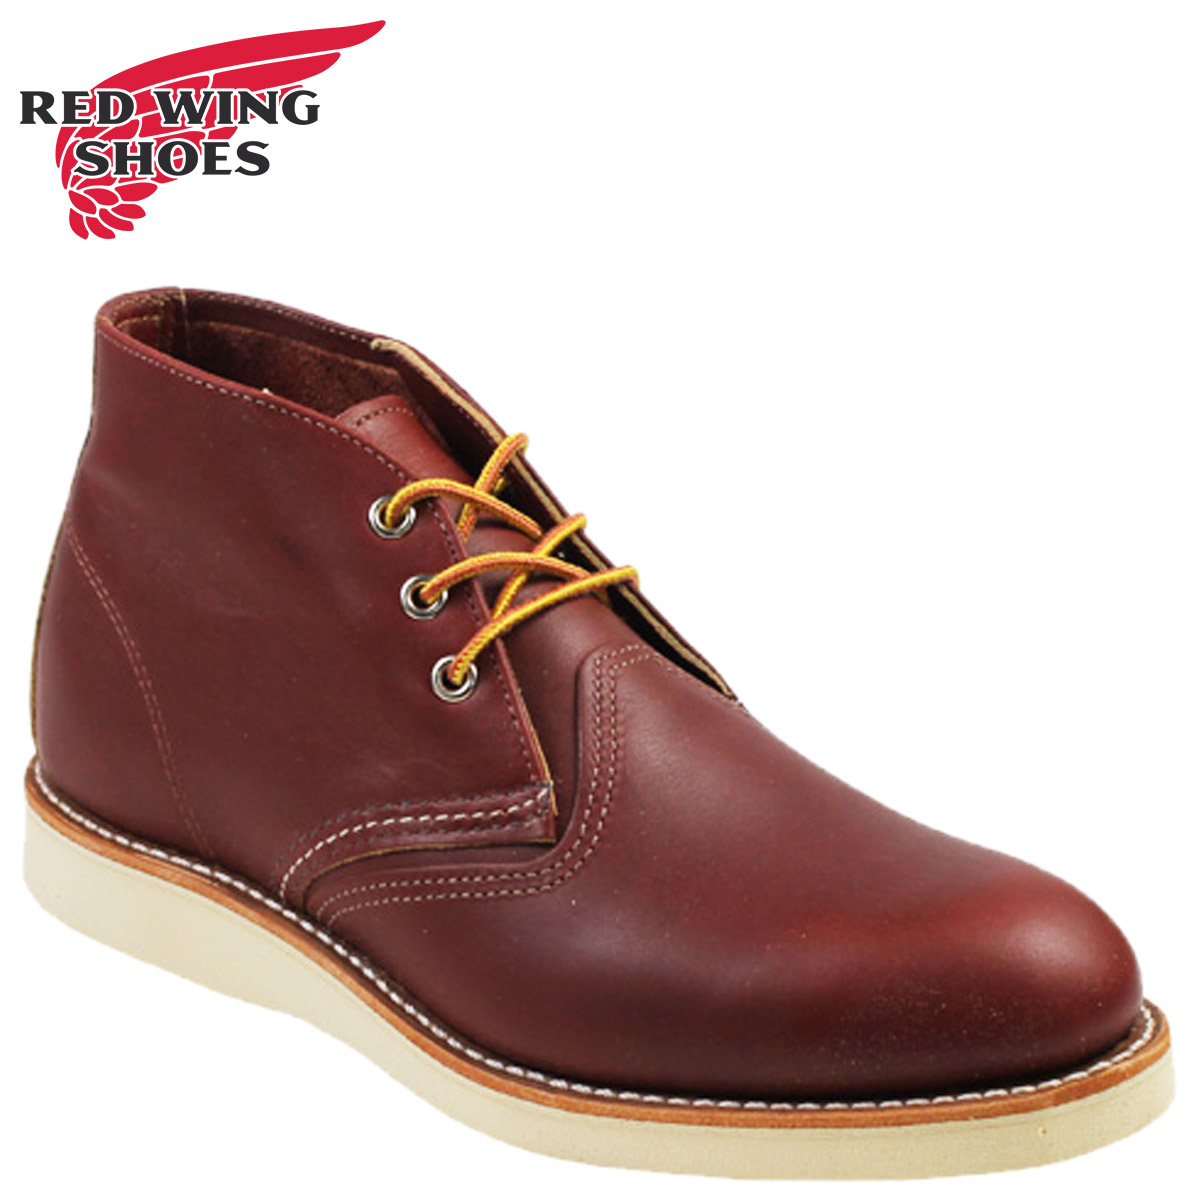 redwing work boots prices